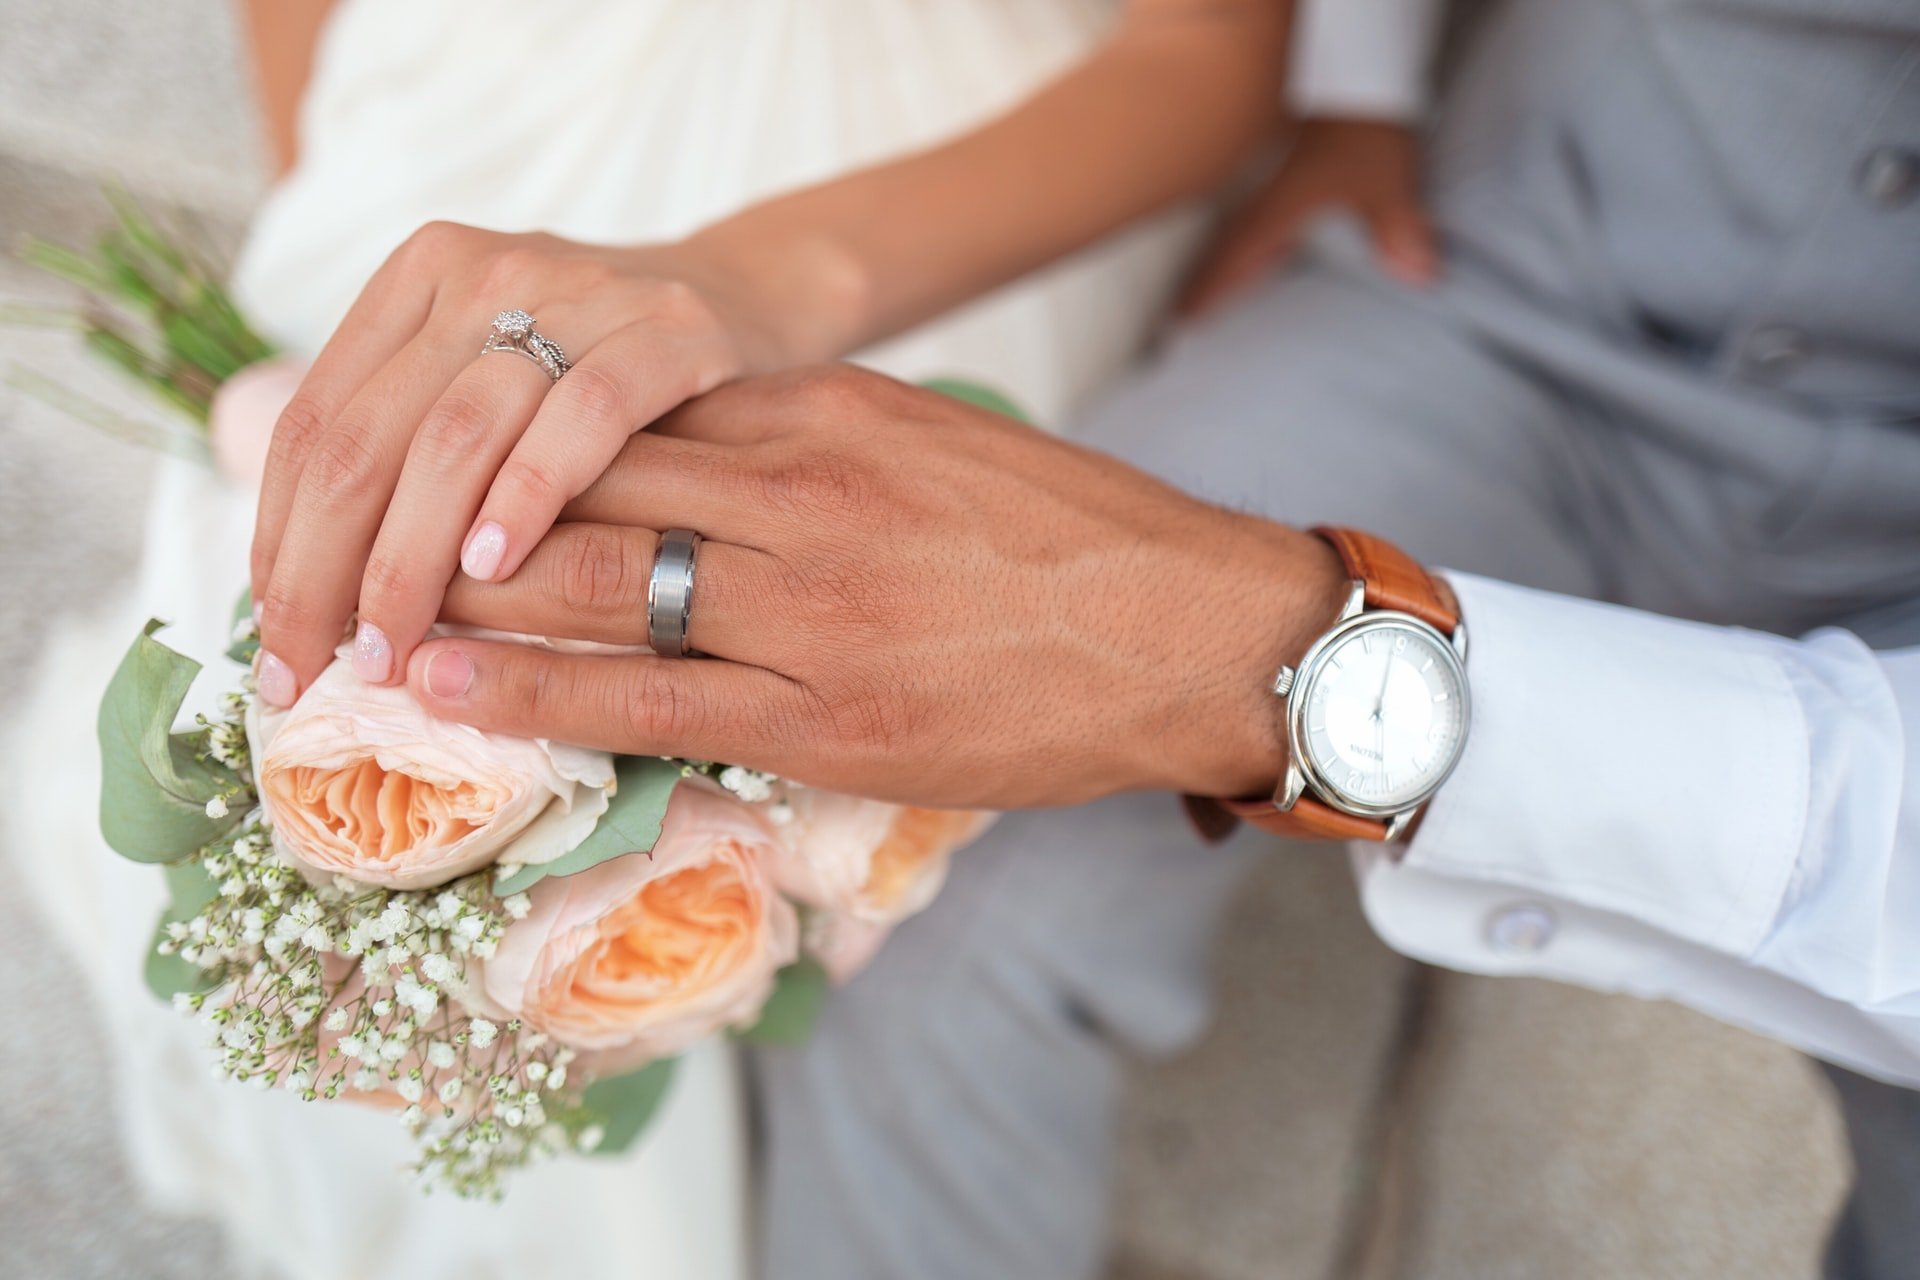 A newly-wed couple showing their wedding rings | Source: Unsplash